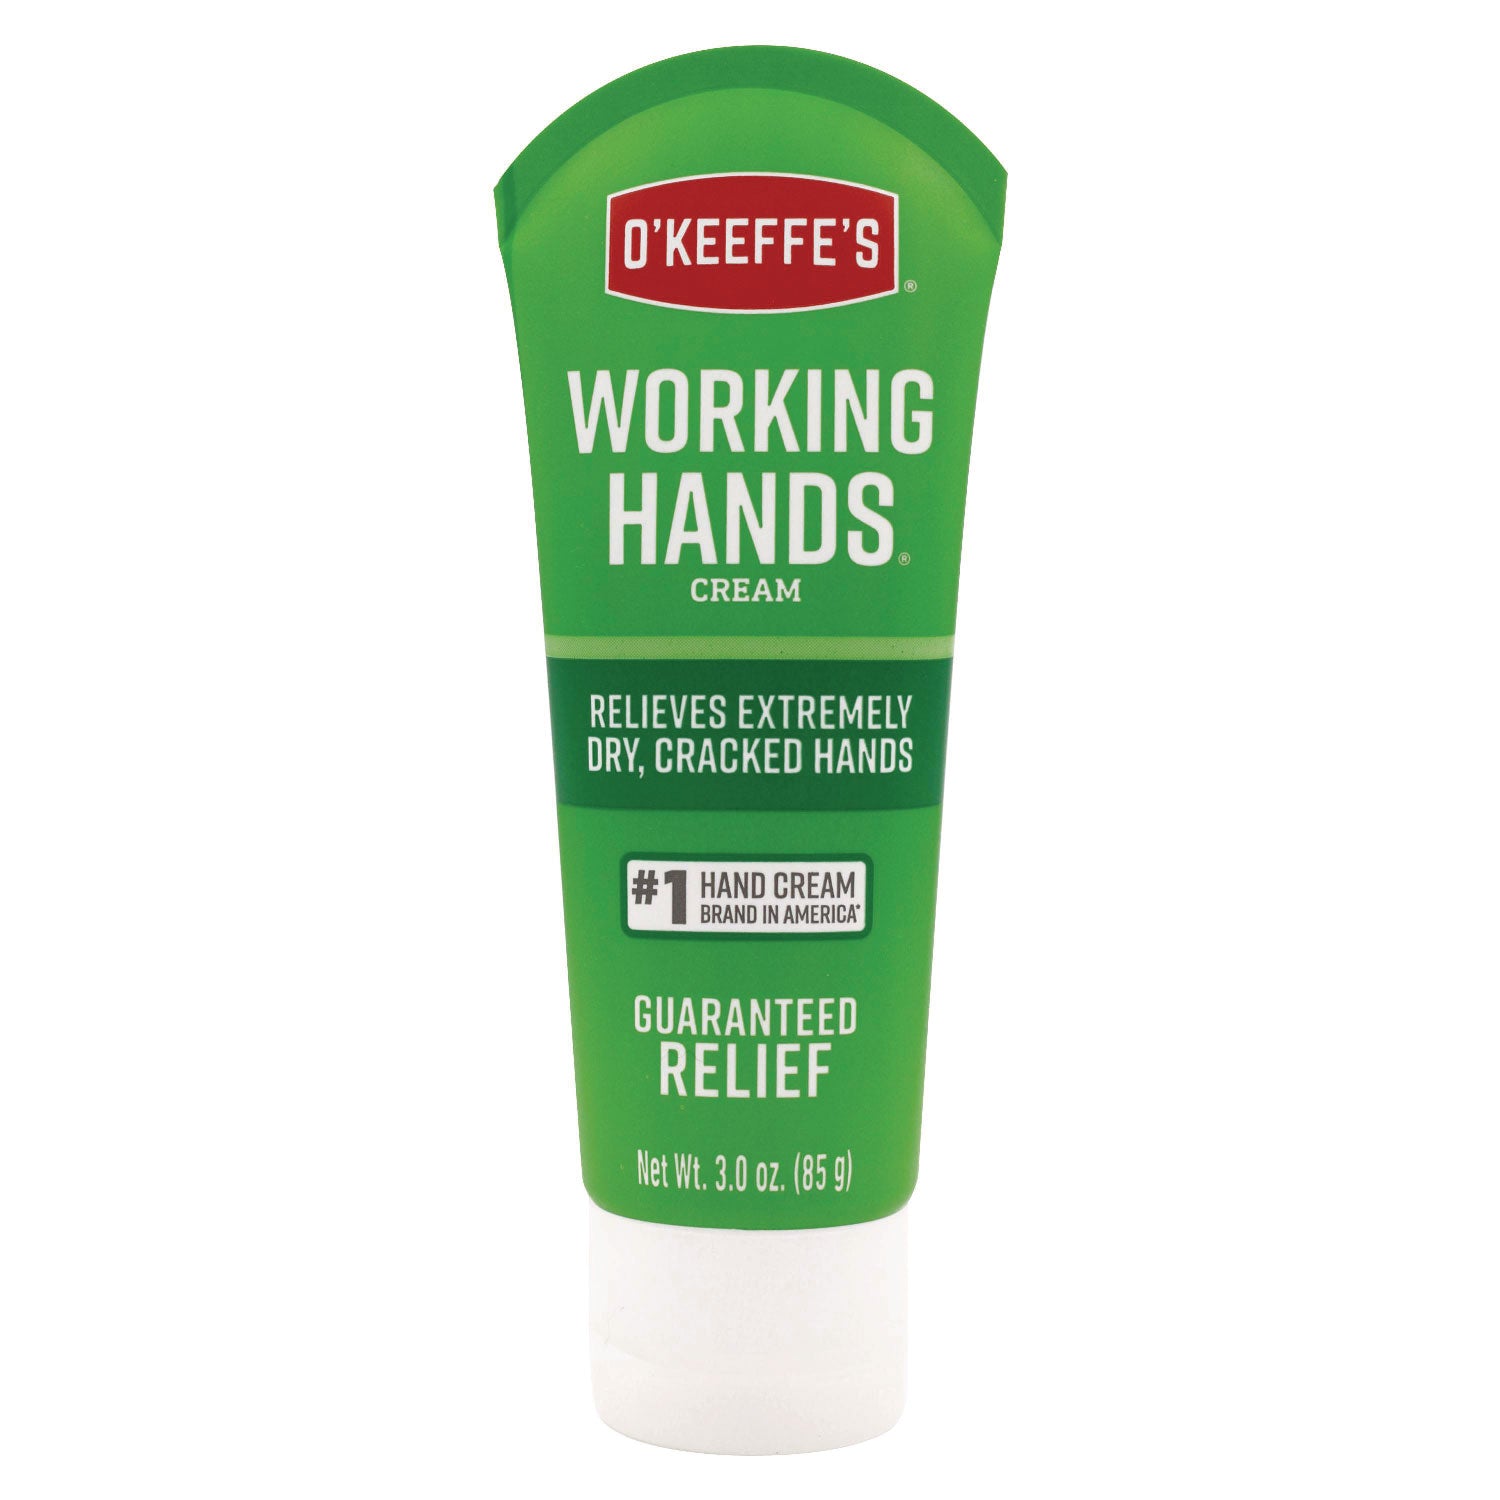 O'Keeffe's Working Hands Hand Cream - Cream - 3 fl oz - For Dry Skin - Applicable on Hand - Cracked/Scaly Skin - Moisturising, Hypoallergenic - 1 Each - 1